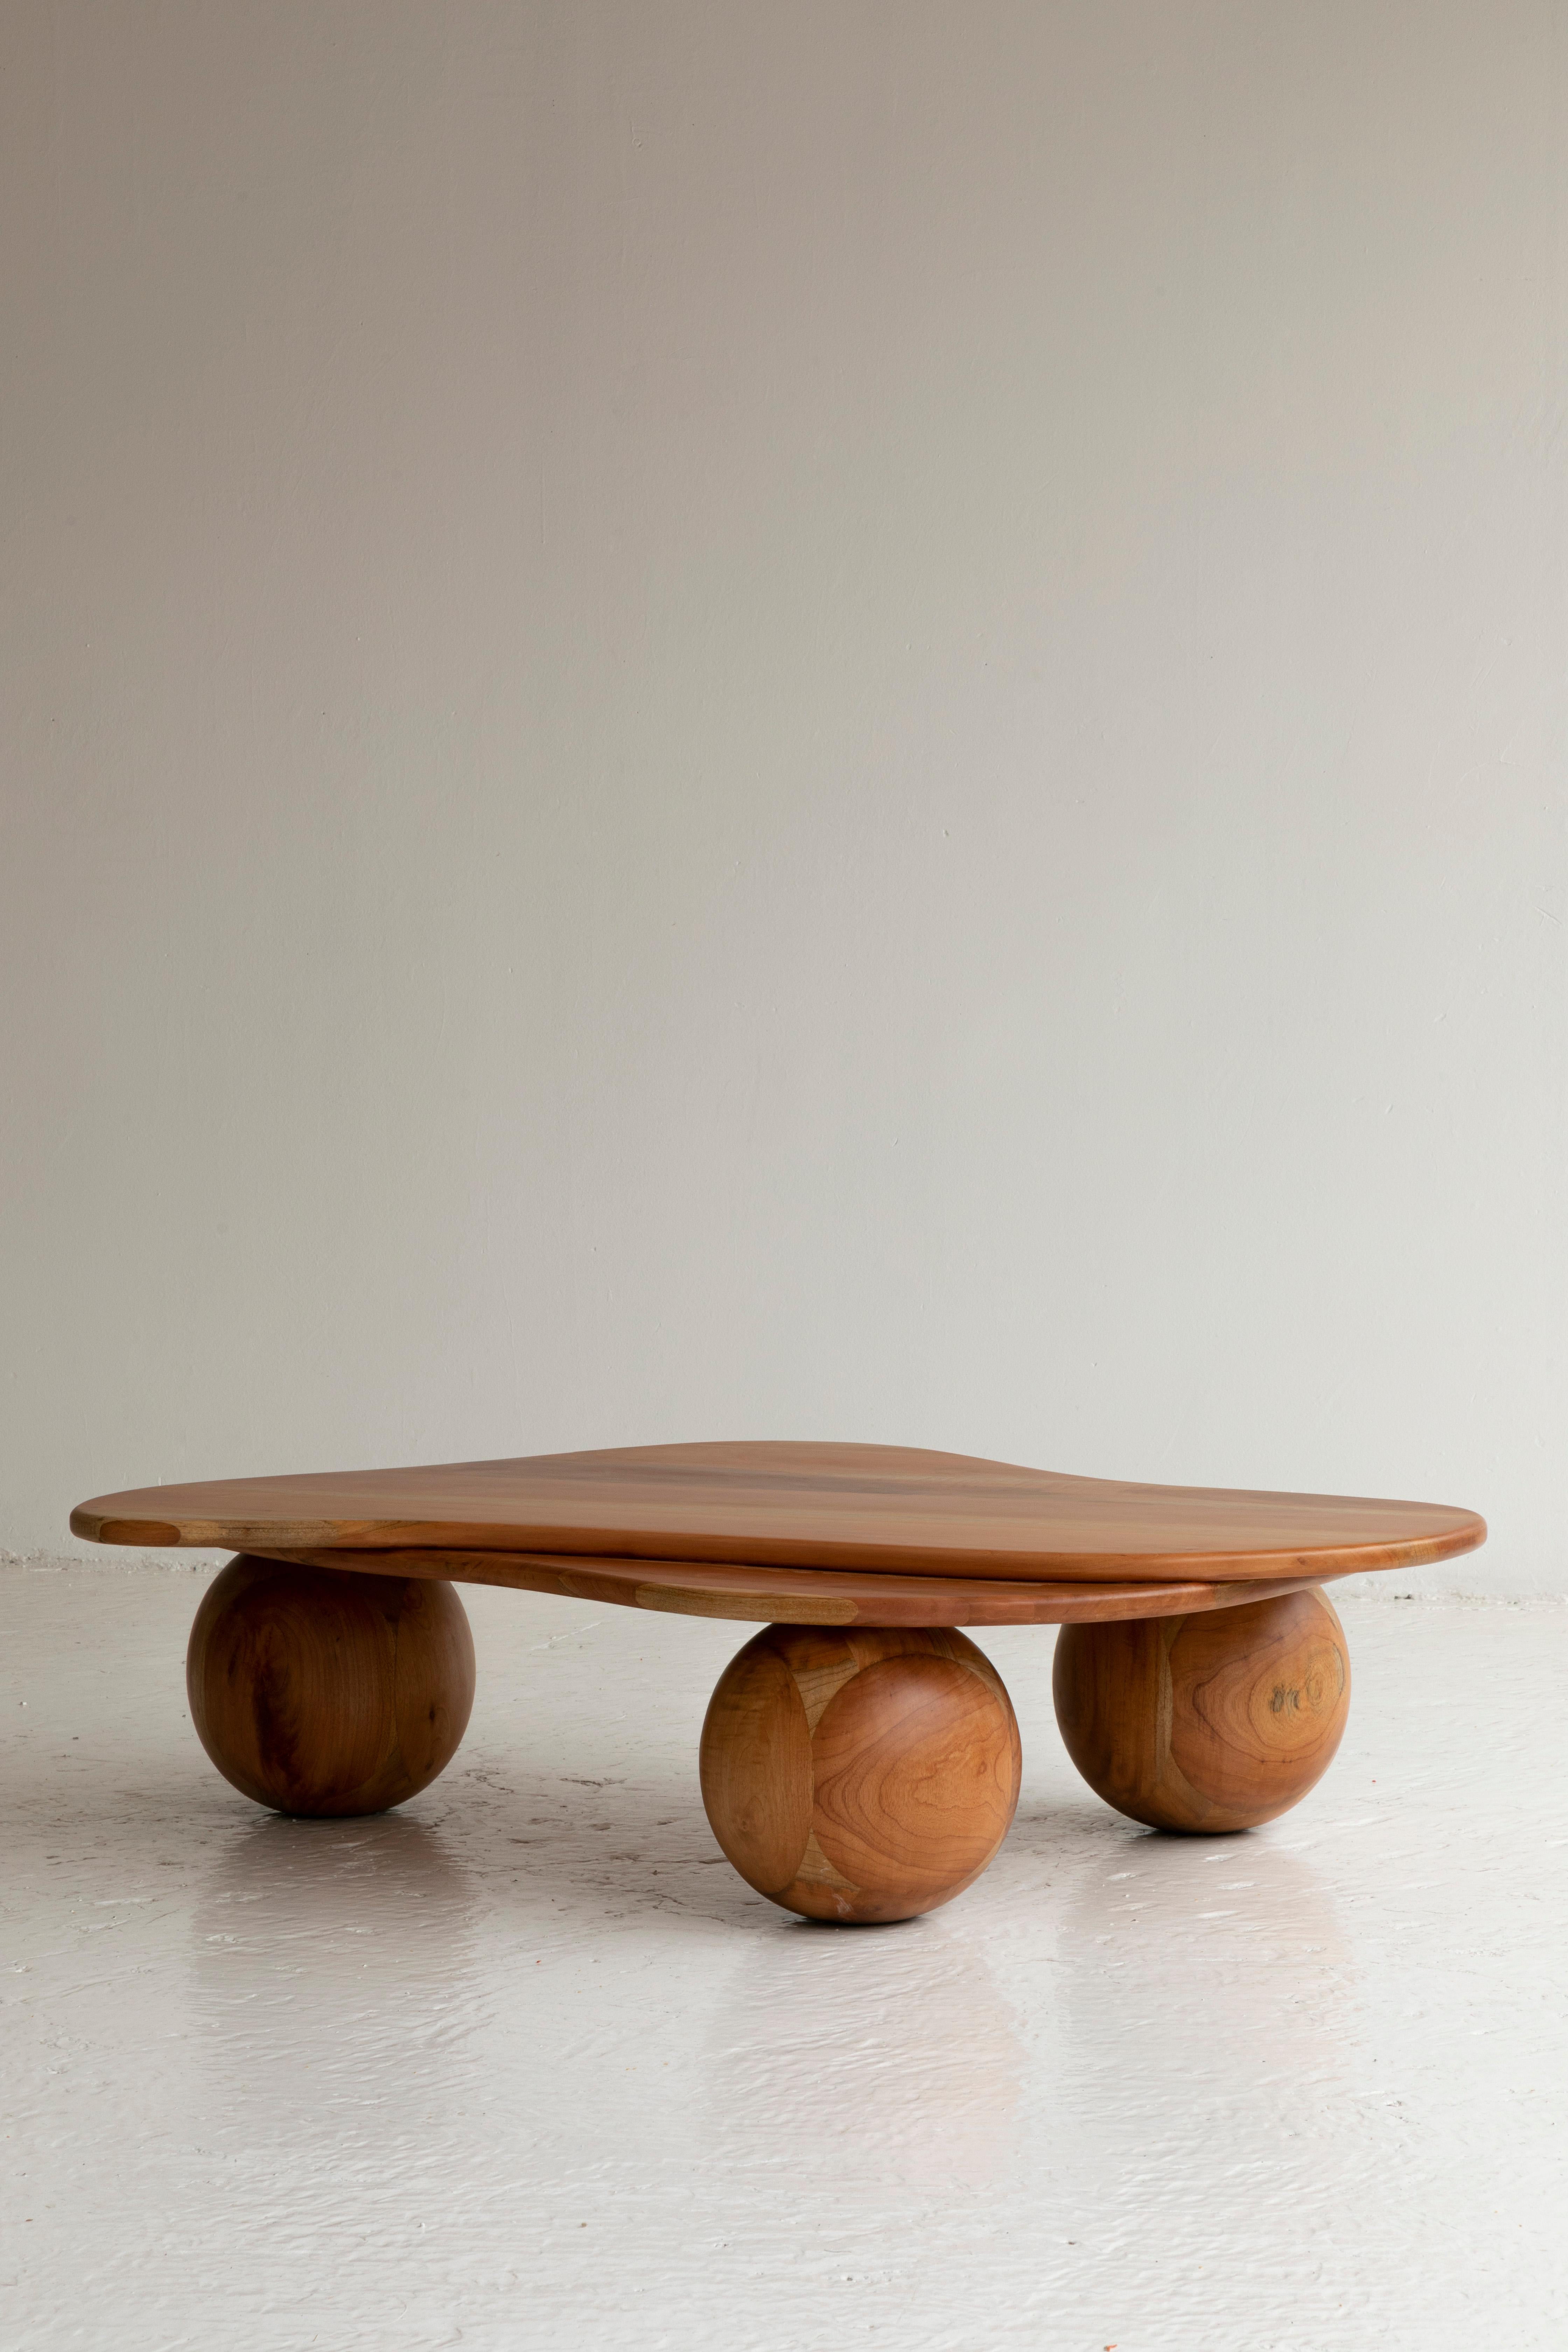 Made entirely of cedar wood in our workshop in Mexico City, our Amoeba coffee table was born as a tribute to the characteristic curves and spherical shapes of pre-Columbian art.